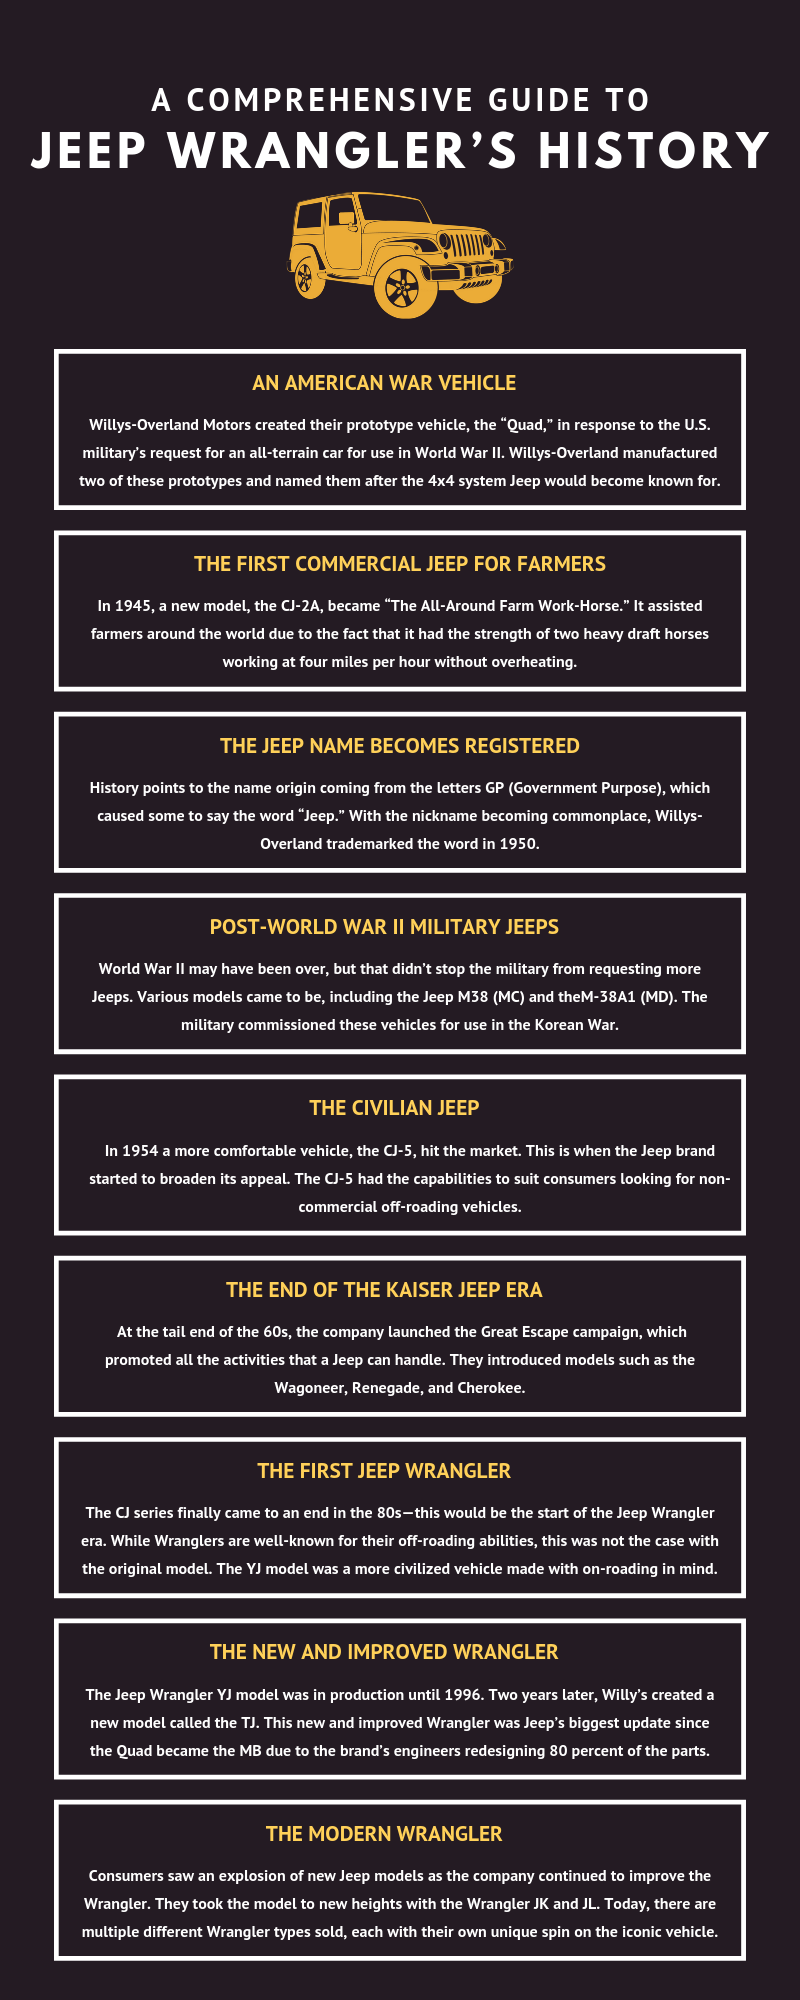 A Comprehensive Guide to Jeep Wrangler’s History infographic